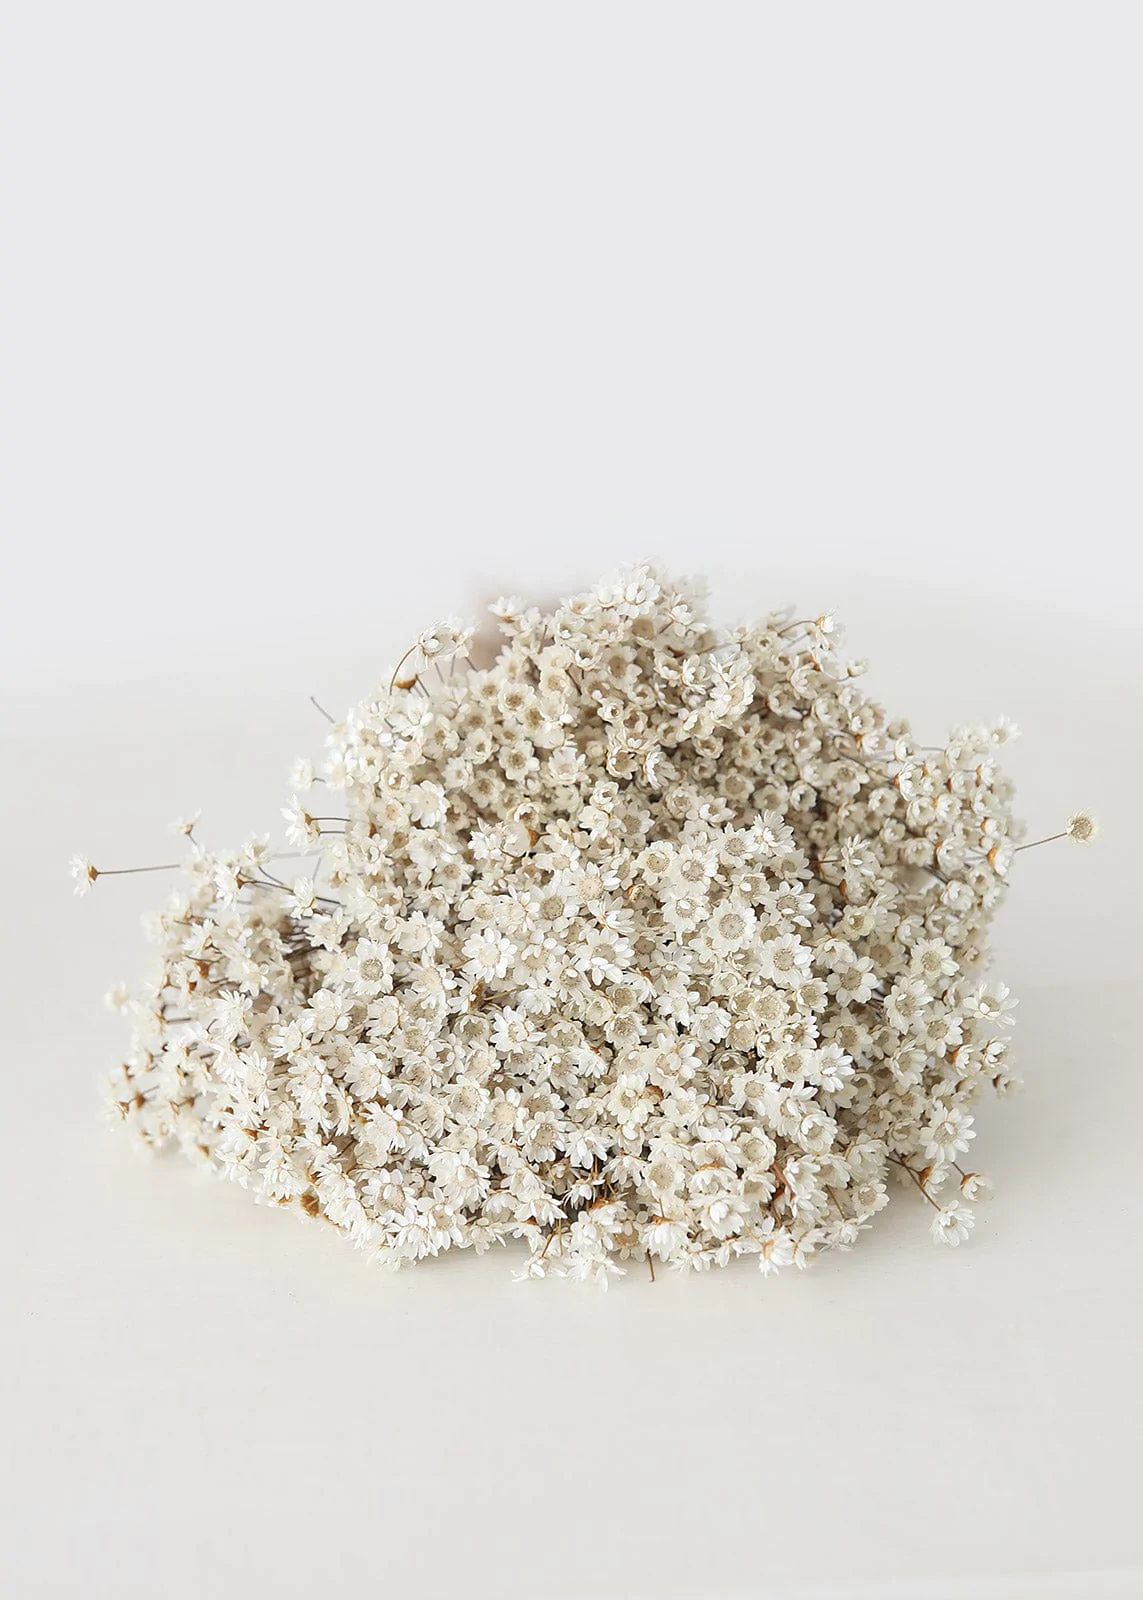 Dried Star Flowers in Natural | Dried Flowers at Afloral.com | Afloral